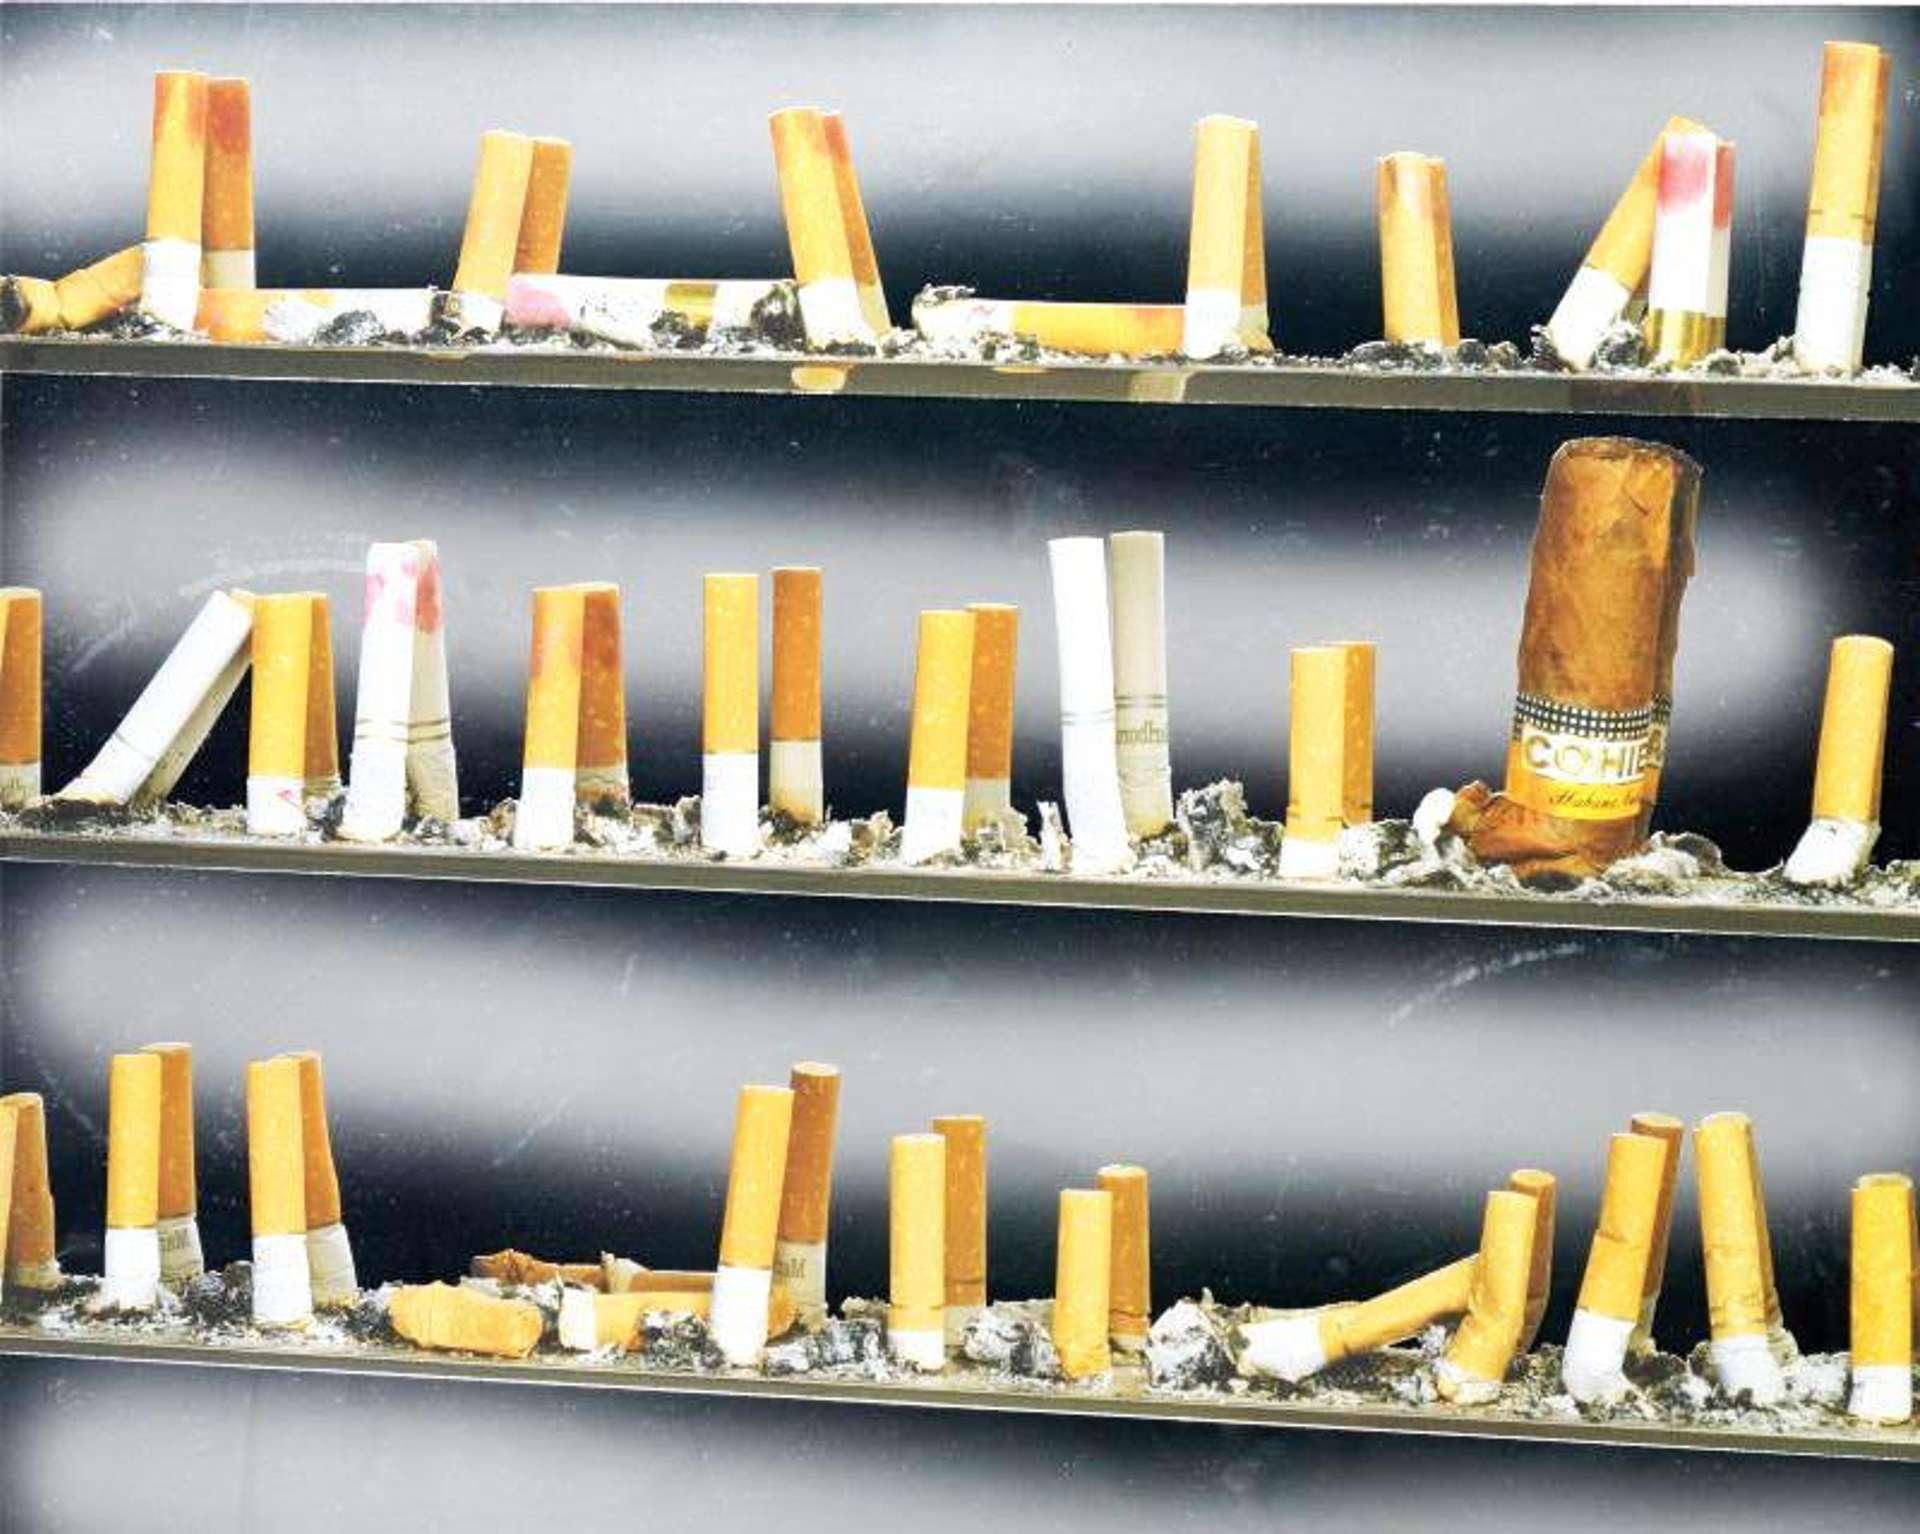 Damien Hirst’s Hell. A digital print of an assortment of burned out cigarettes lined up inside a medicine cabinet. 